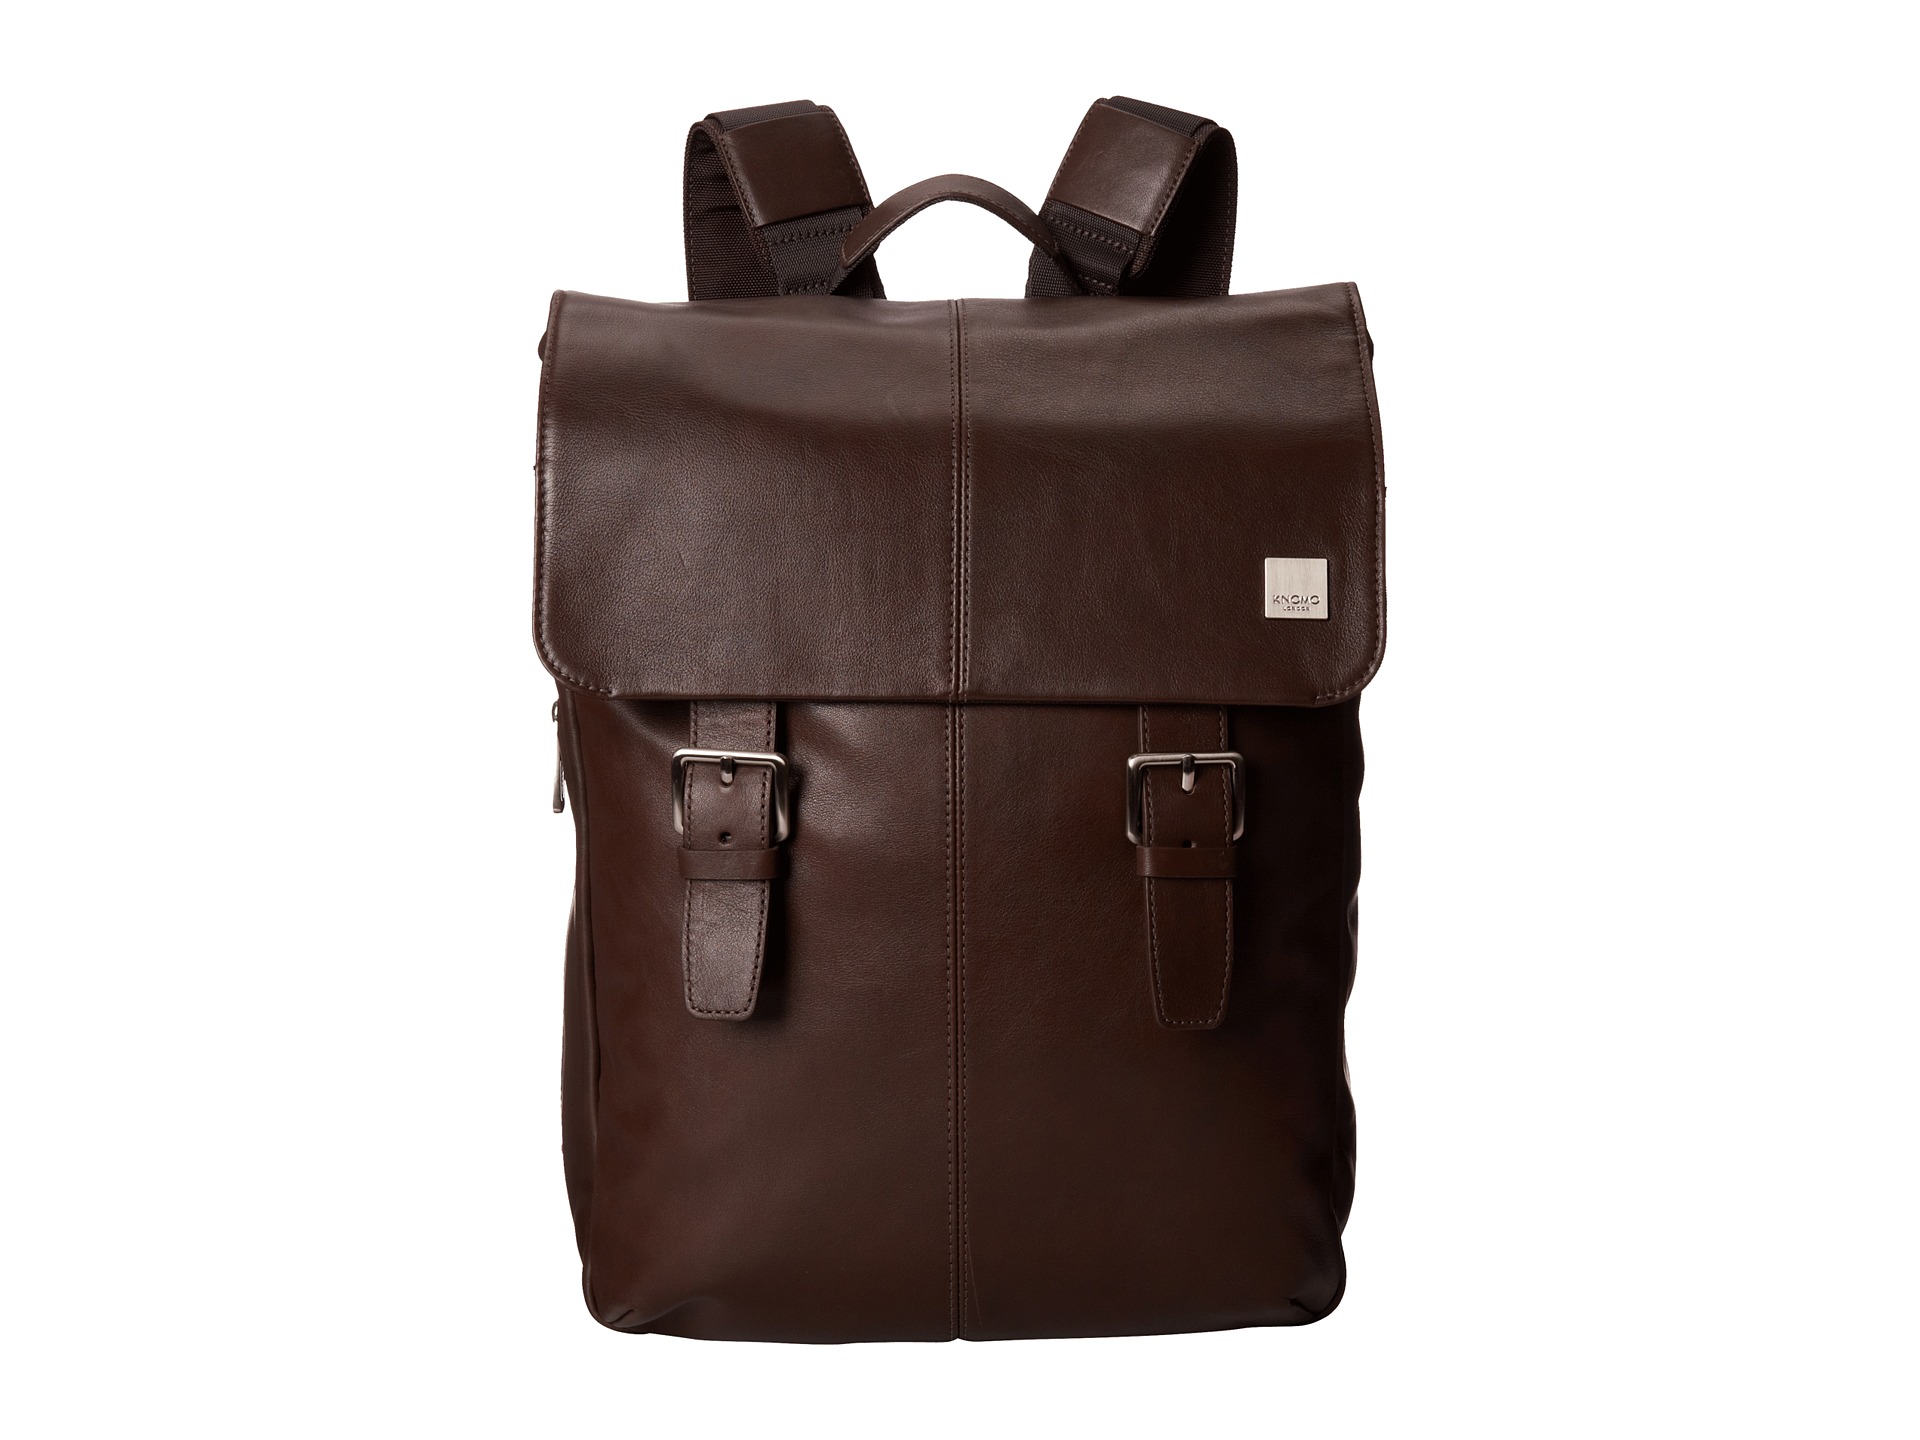 KNOMO London Hudson Leather Laptop Backpack  Zappos.com Free Shipping 